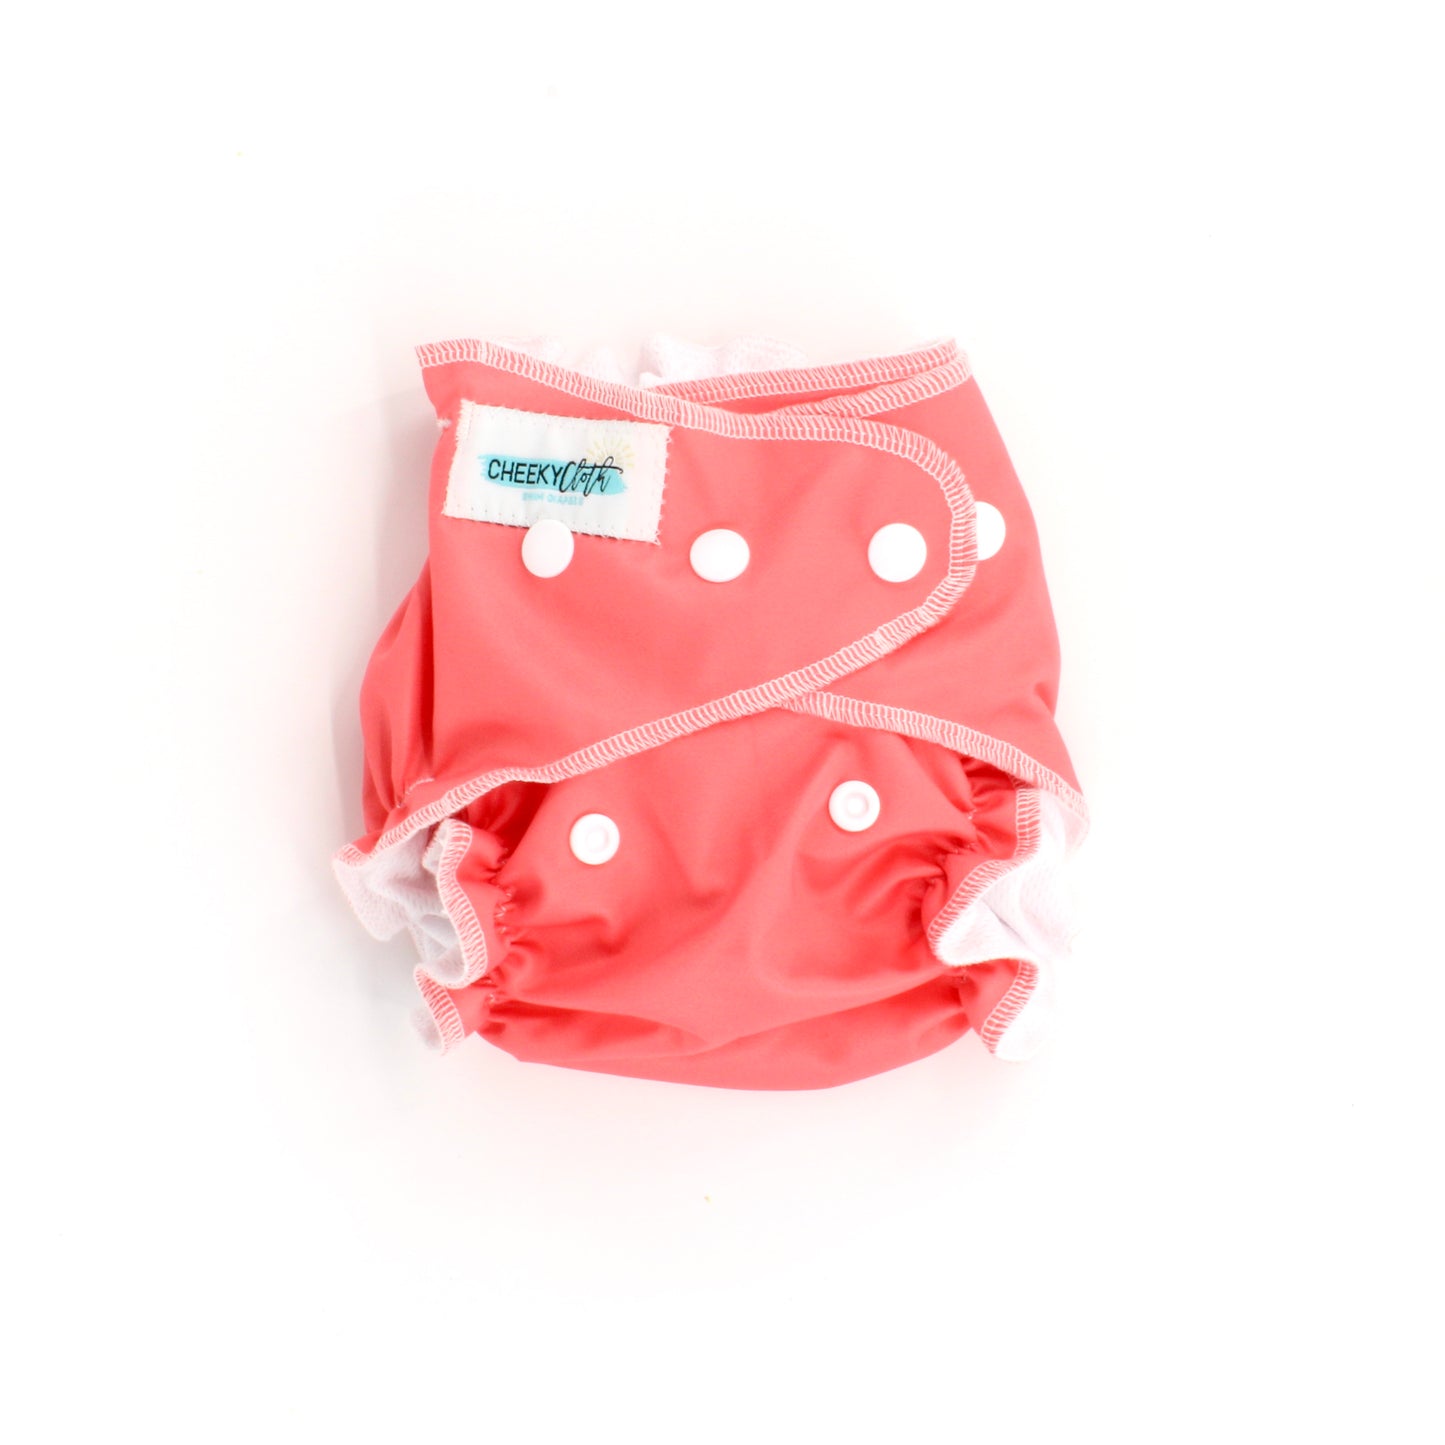 Cheeky Cloth One Size Reusable Swim Diaper "Punch Pink"